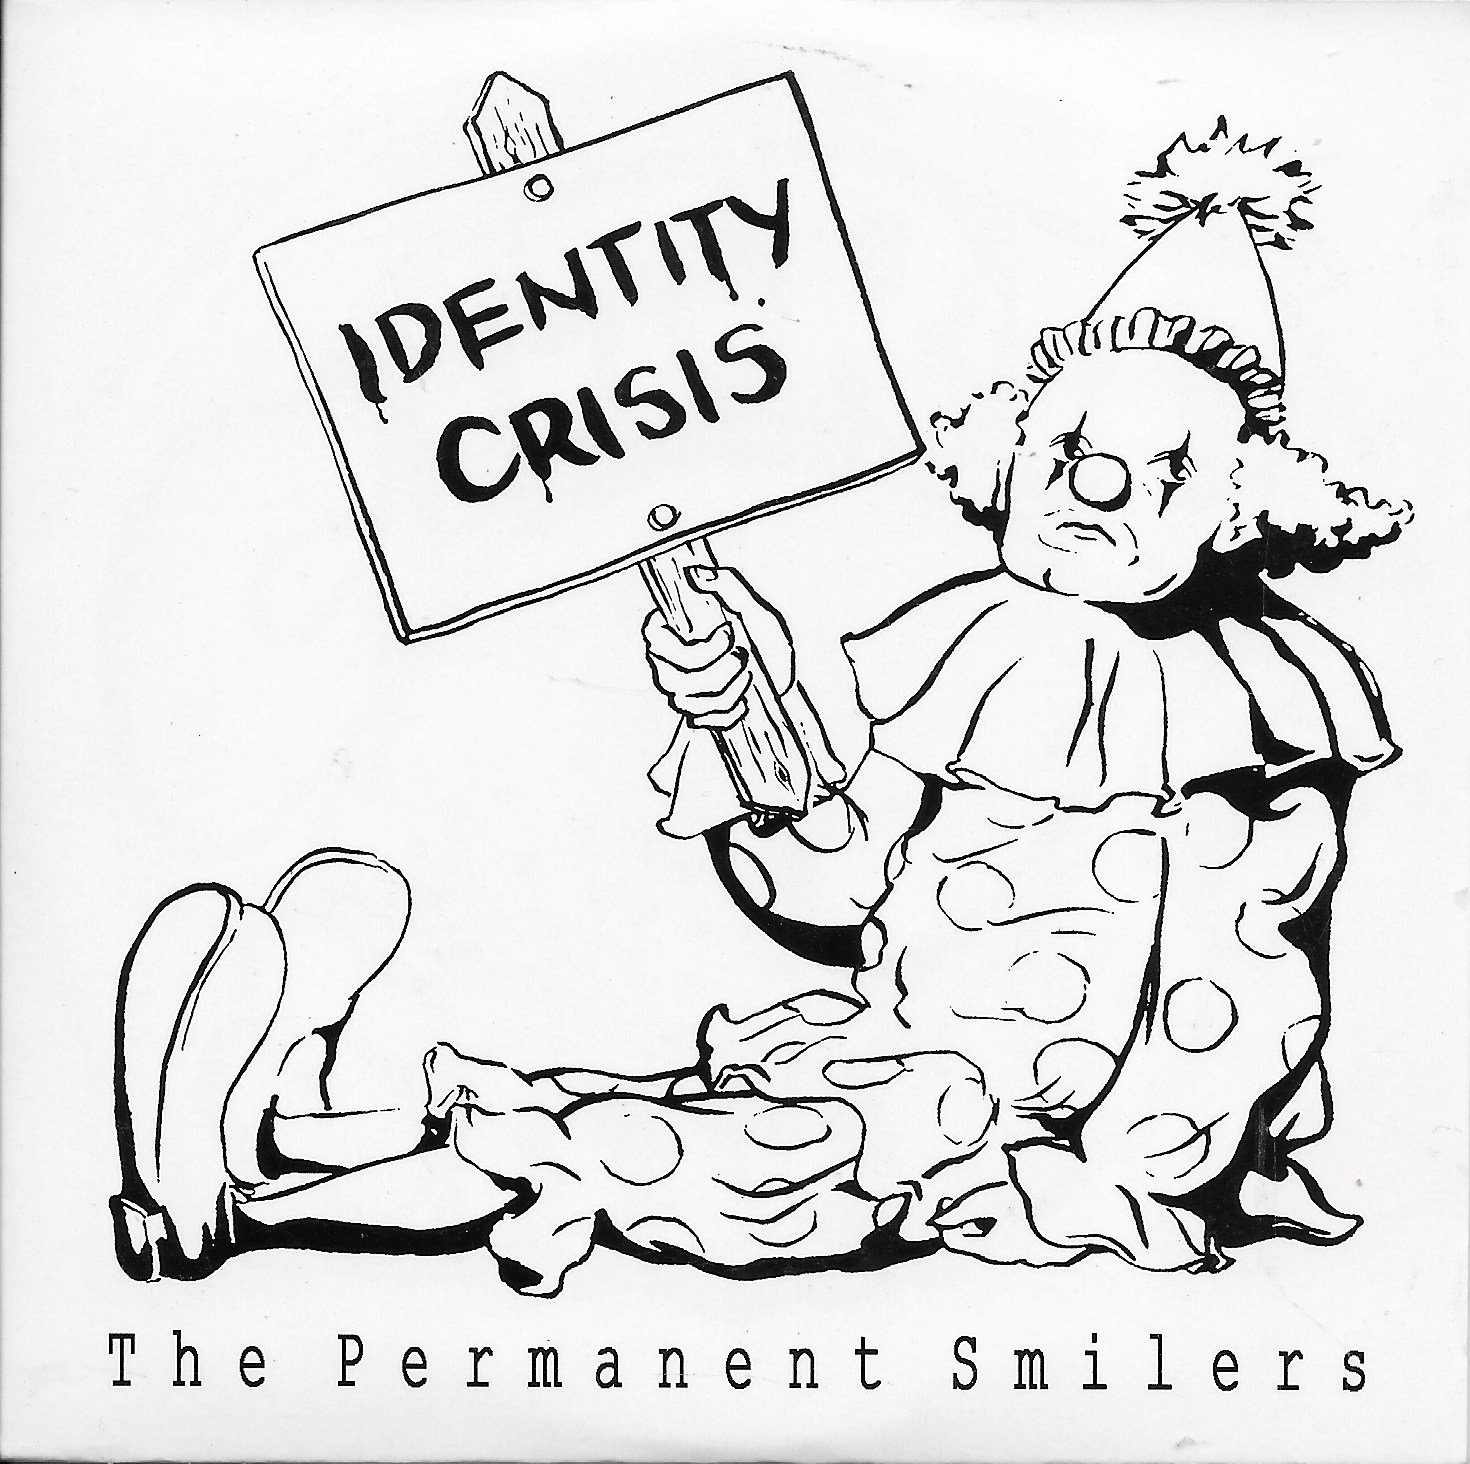 Picture of CITRIC 9 Identity crisis by artist The Permanent Smilers 